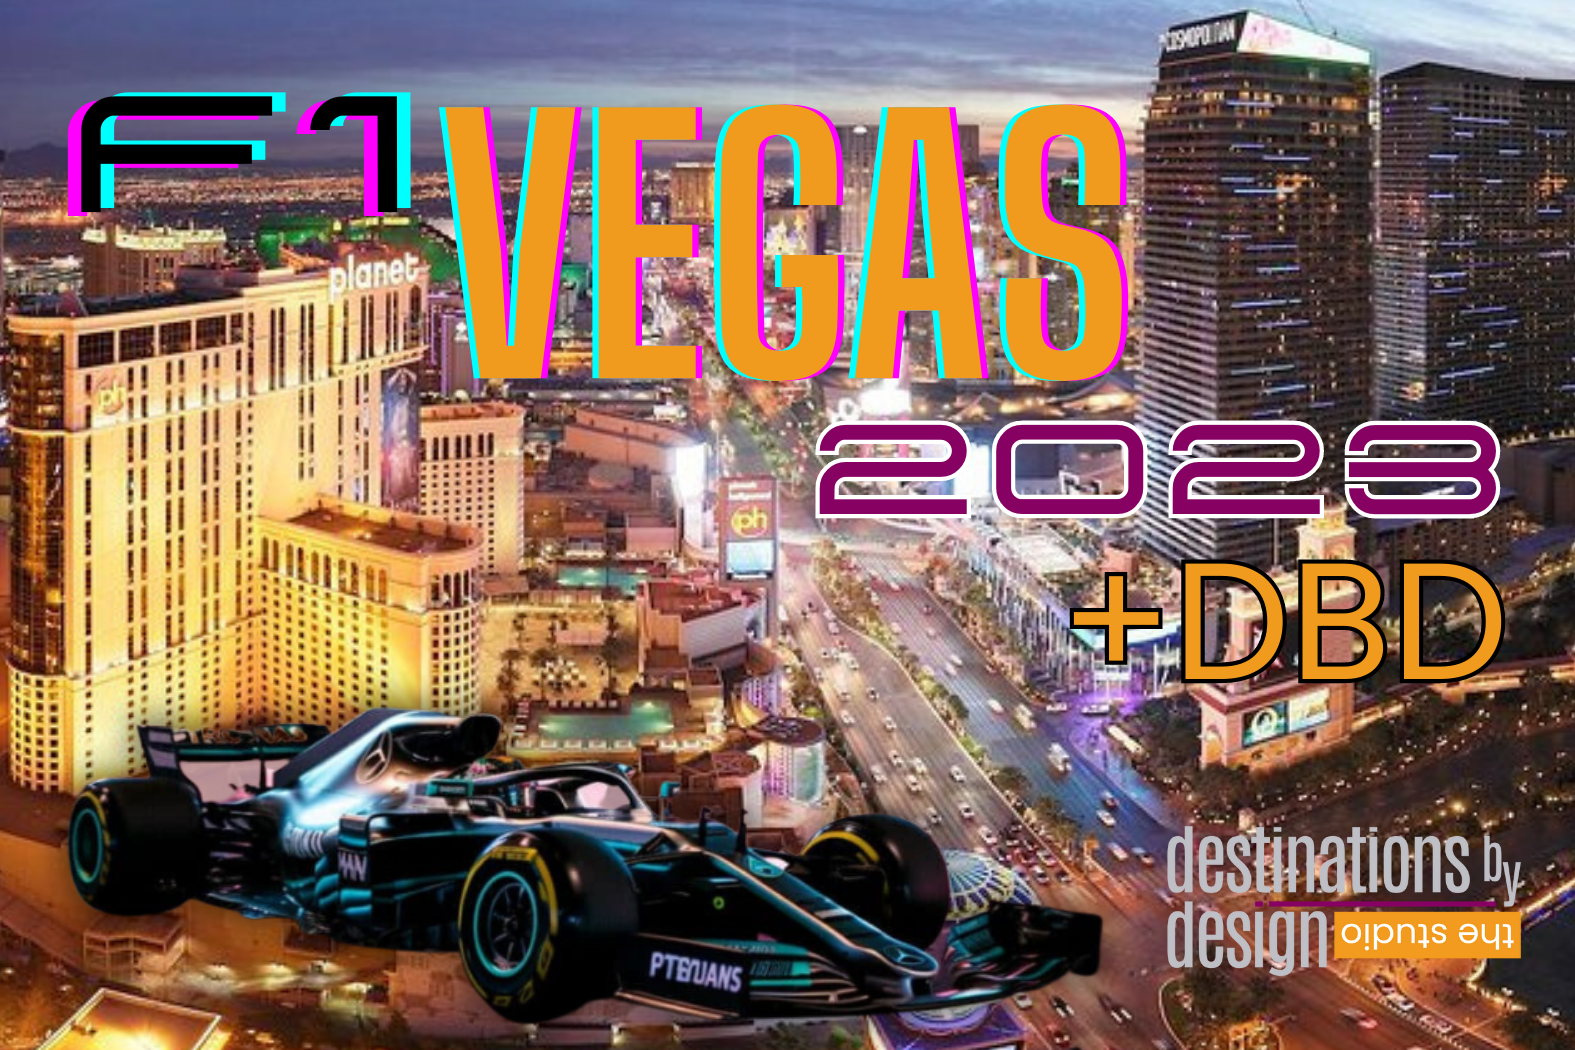 Expand Corporate Branding Through Experiential Events with DBD During The 2023 Las Vegas Formula 1 Grand Prix Races